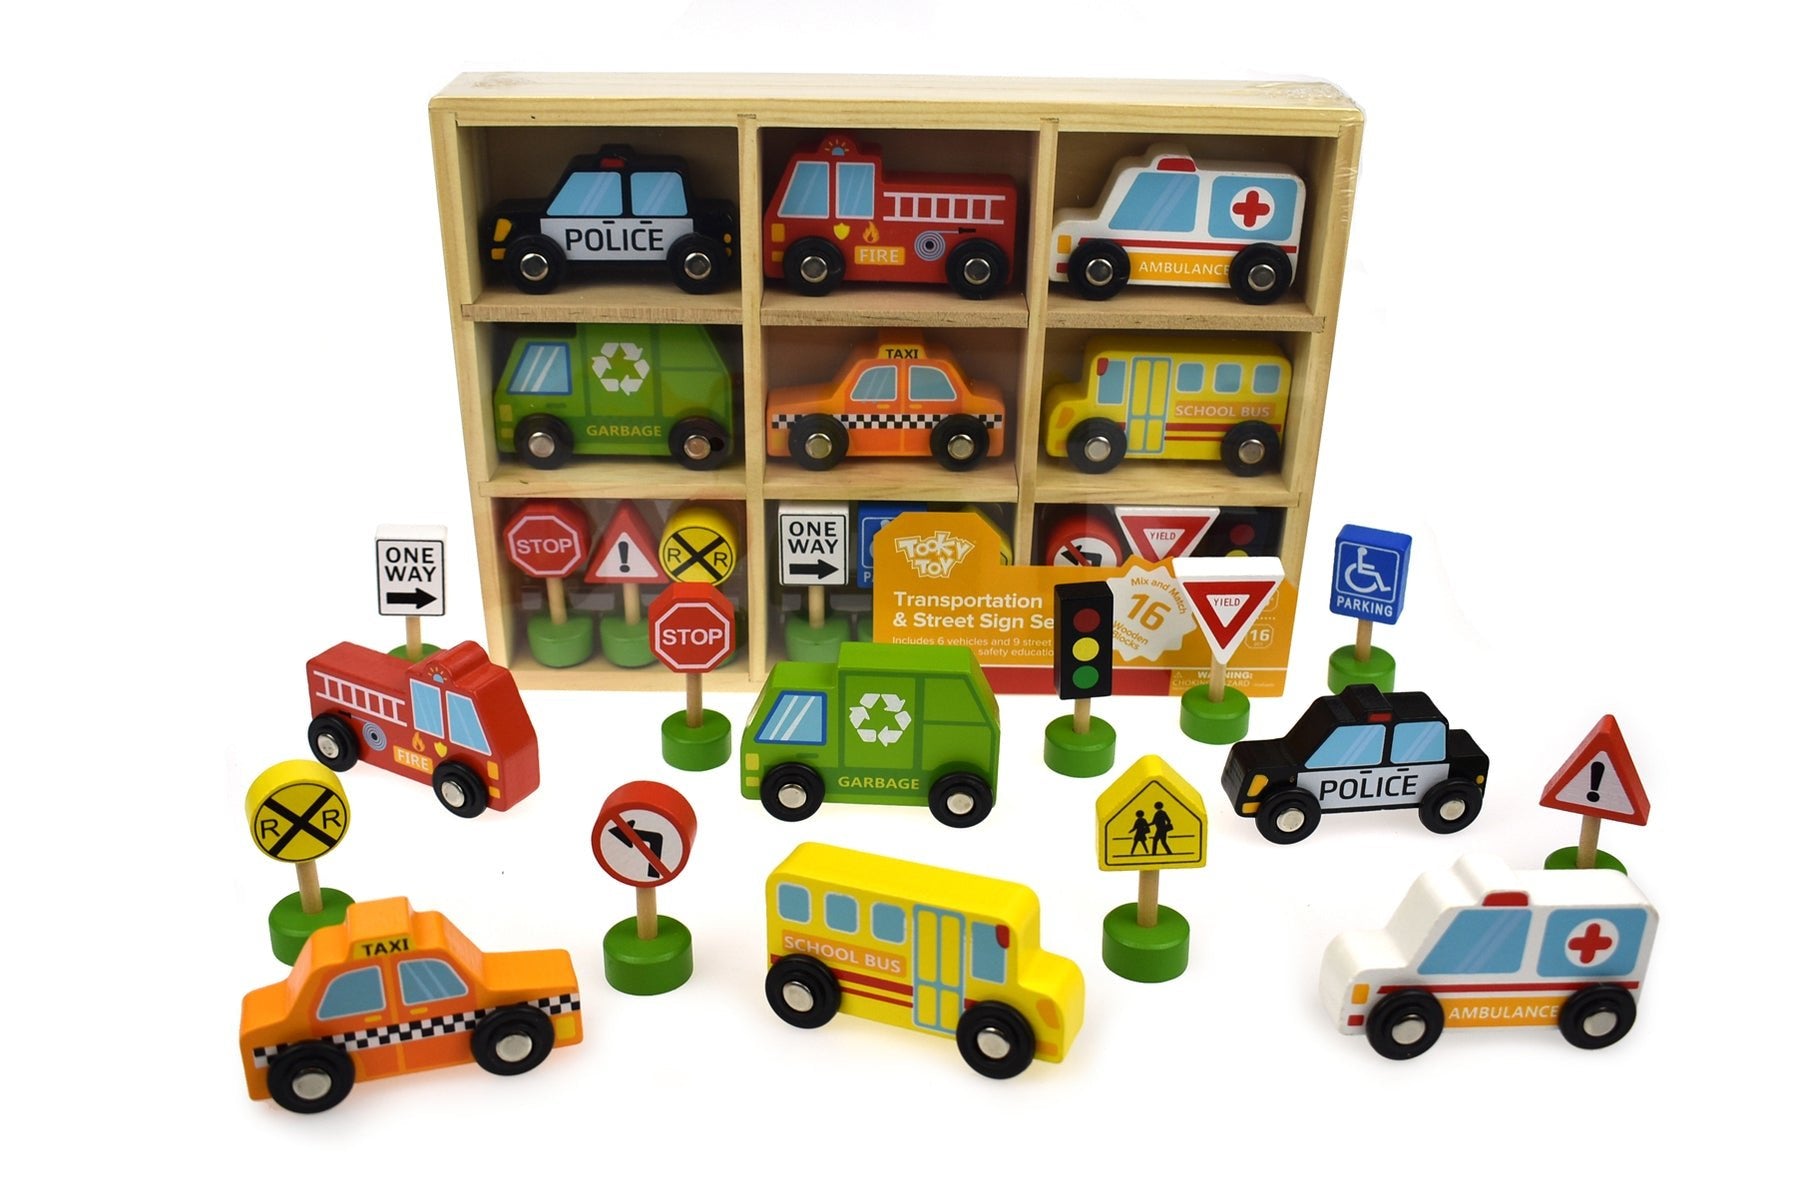 A collection of wooden toy vehicles and street signs